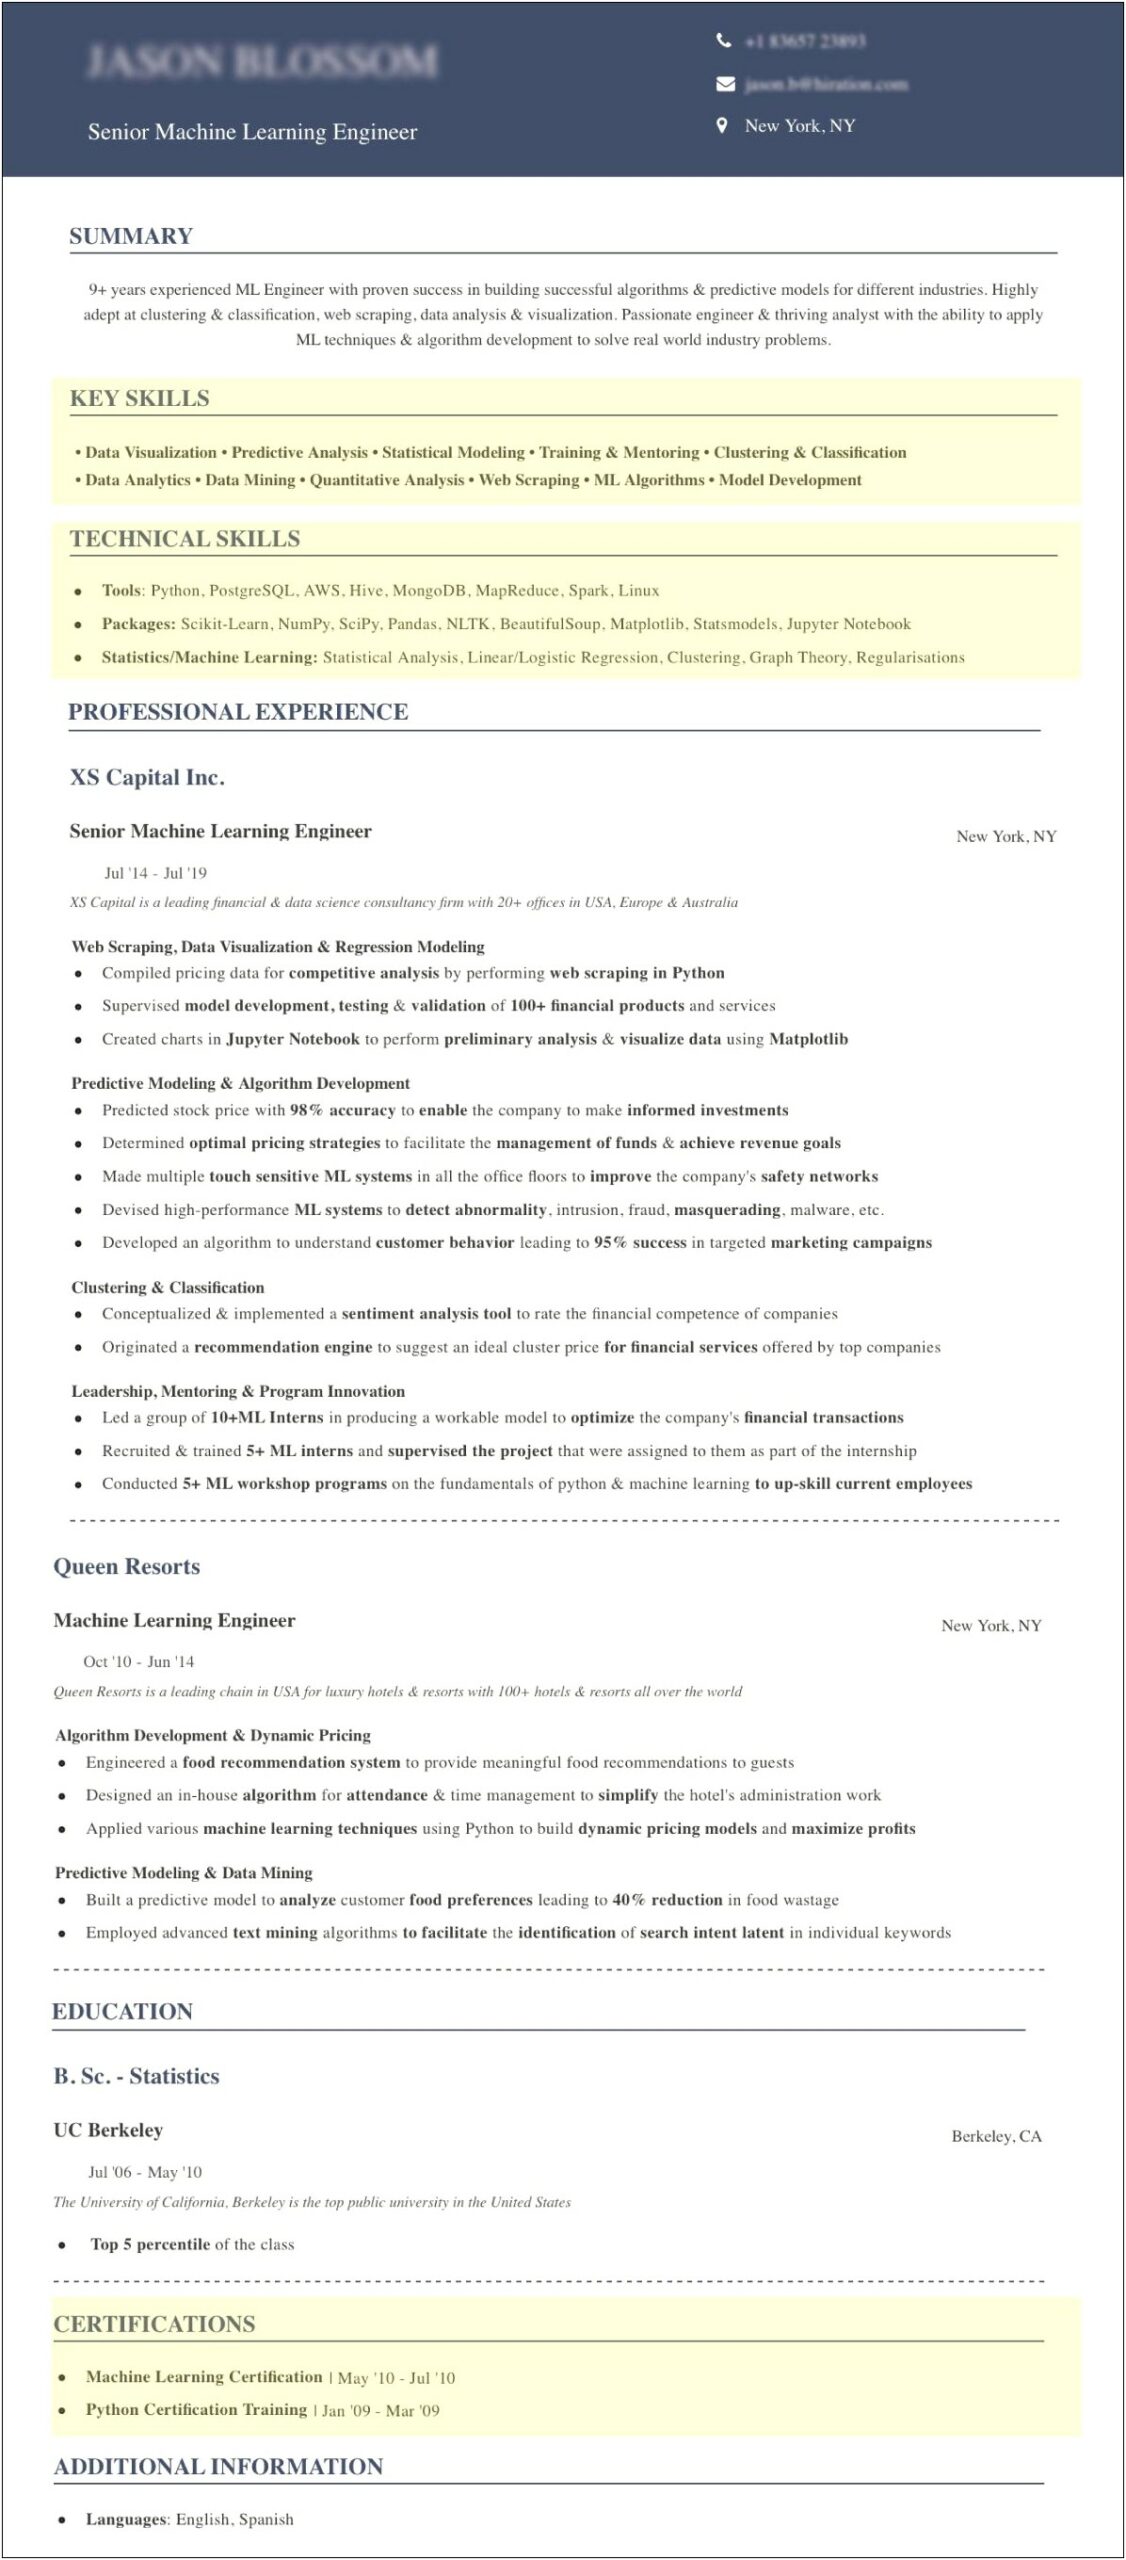 Devops Resume For 2 Years Experience